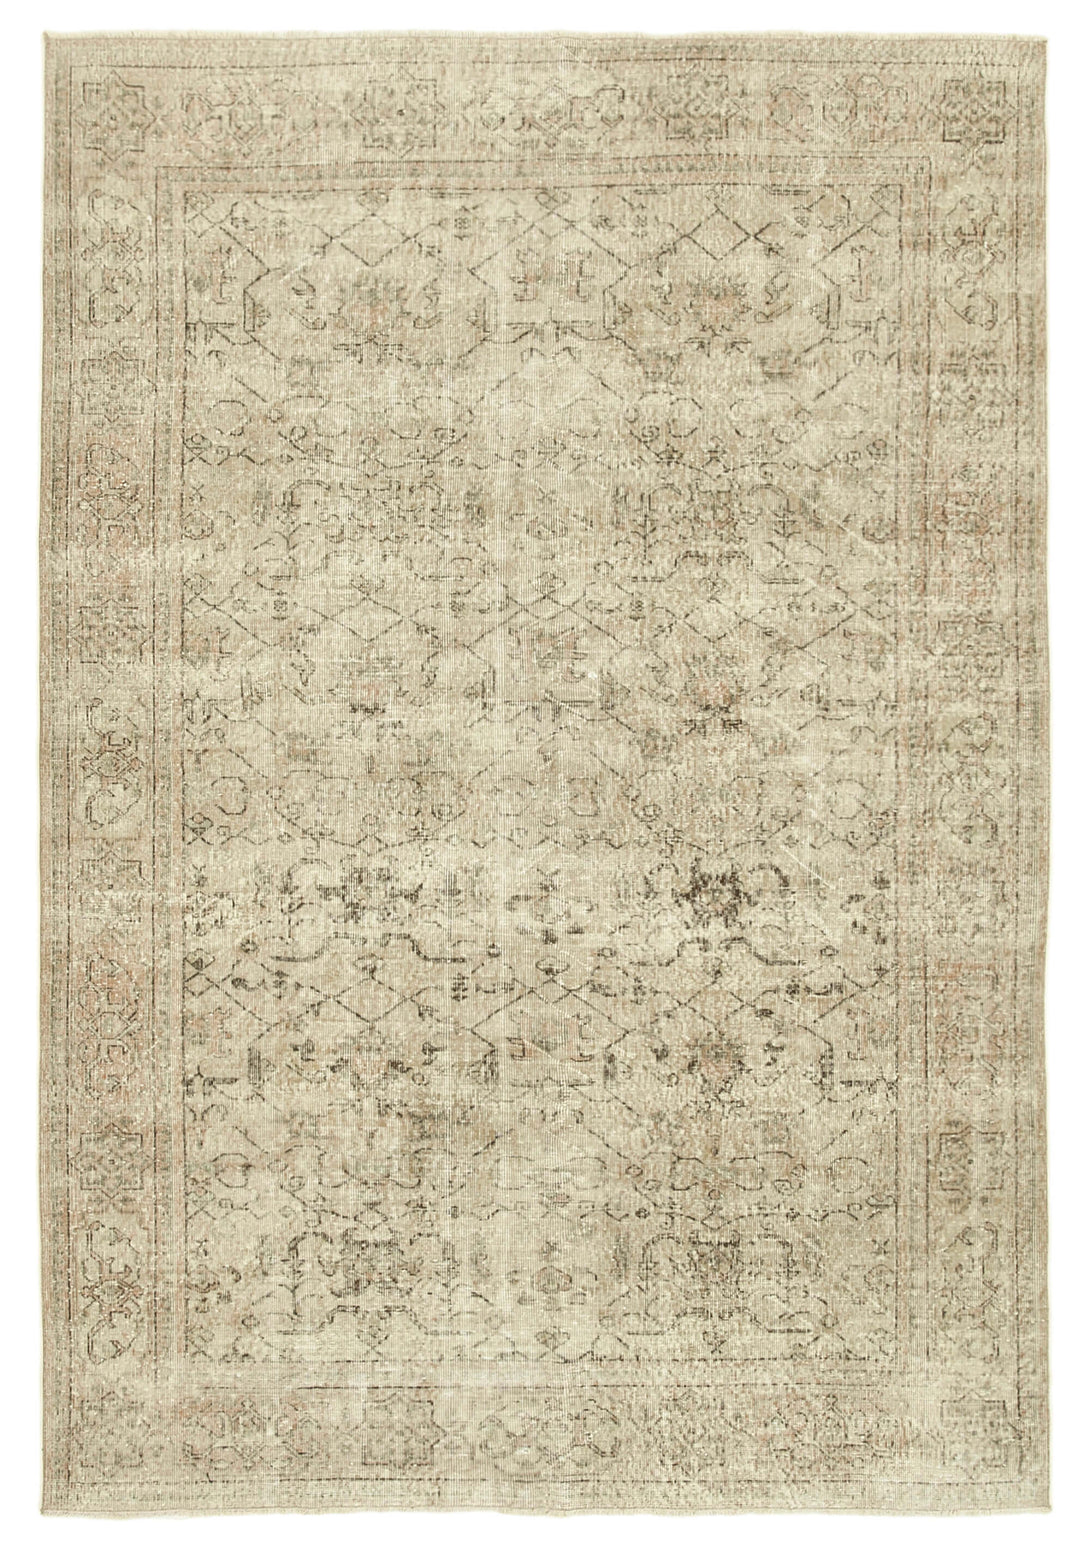 Handmade White Wash Area Rug > Design# OL-AC-38837 > Size: 6'-11" x 10'-1", Carpet Culture Rugs, Handmade Rugs, NYC Rugs, New Rugs, Shop Rugs, Rug Store, Outlet Rugs, SoHo Rugs, Rugs in USA